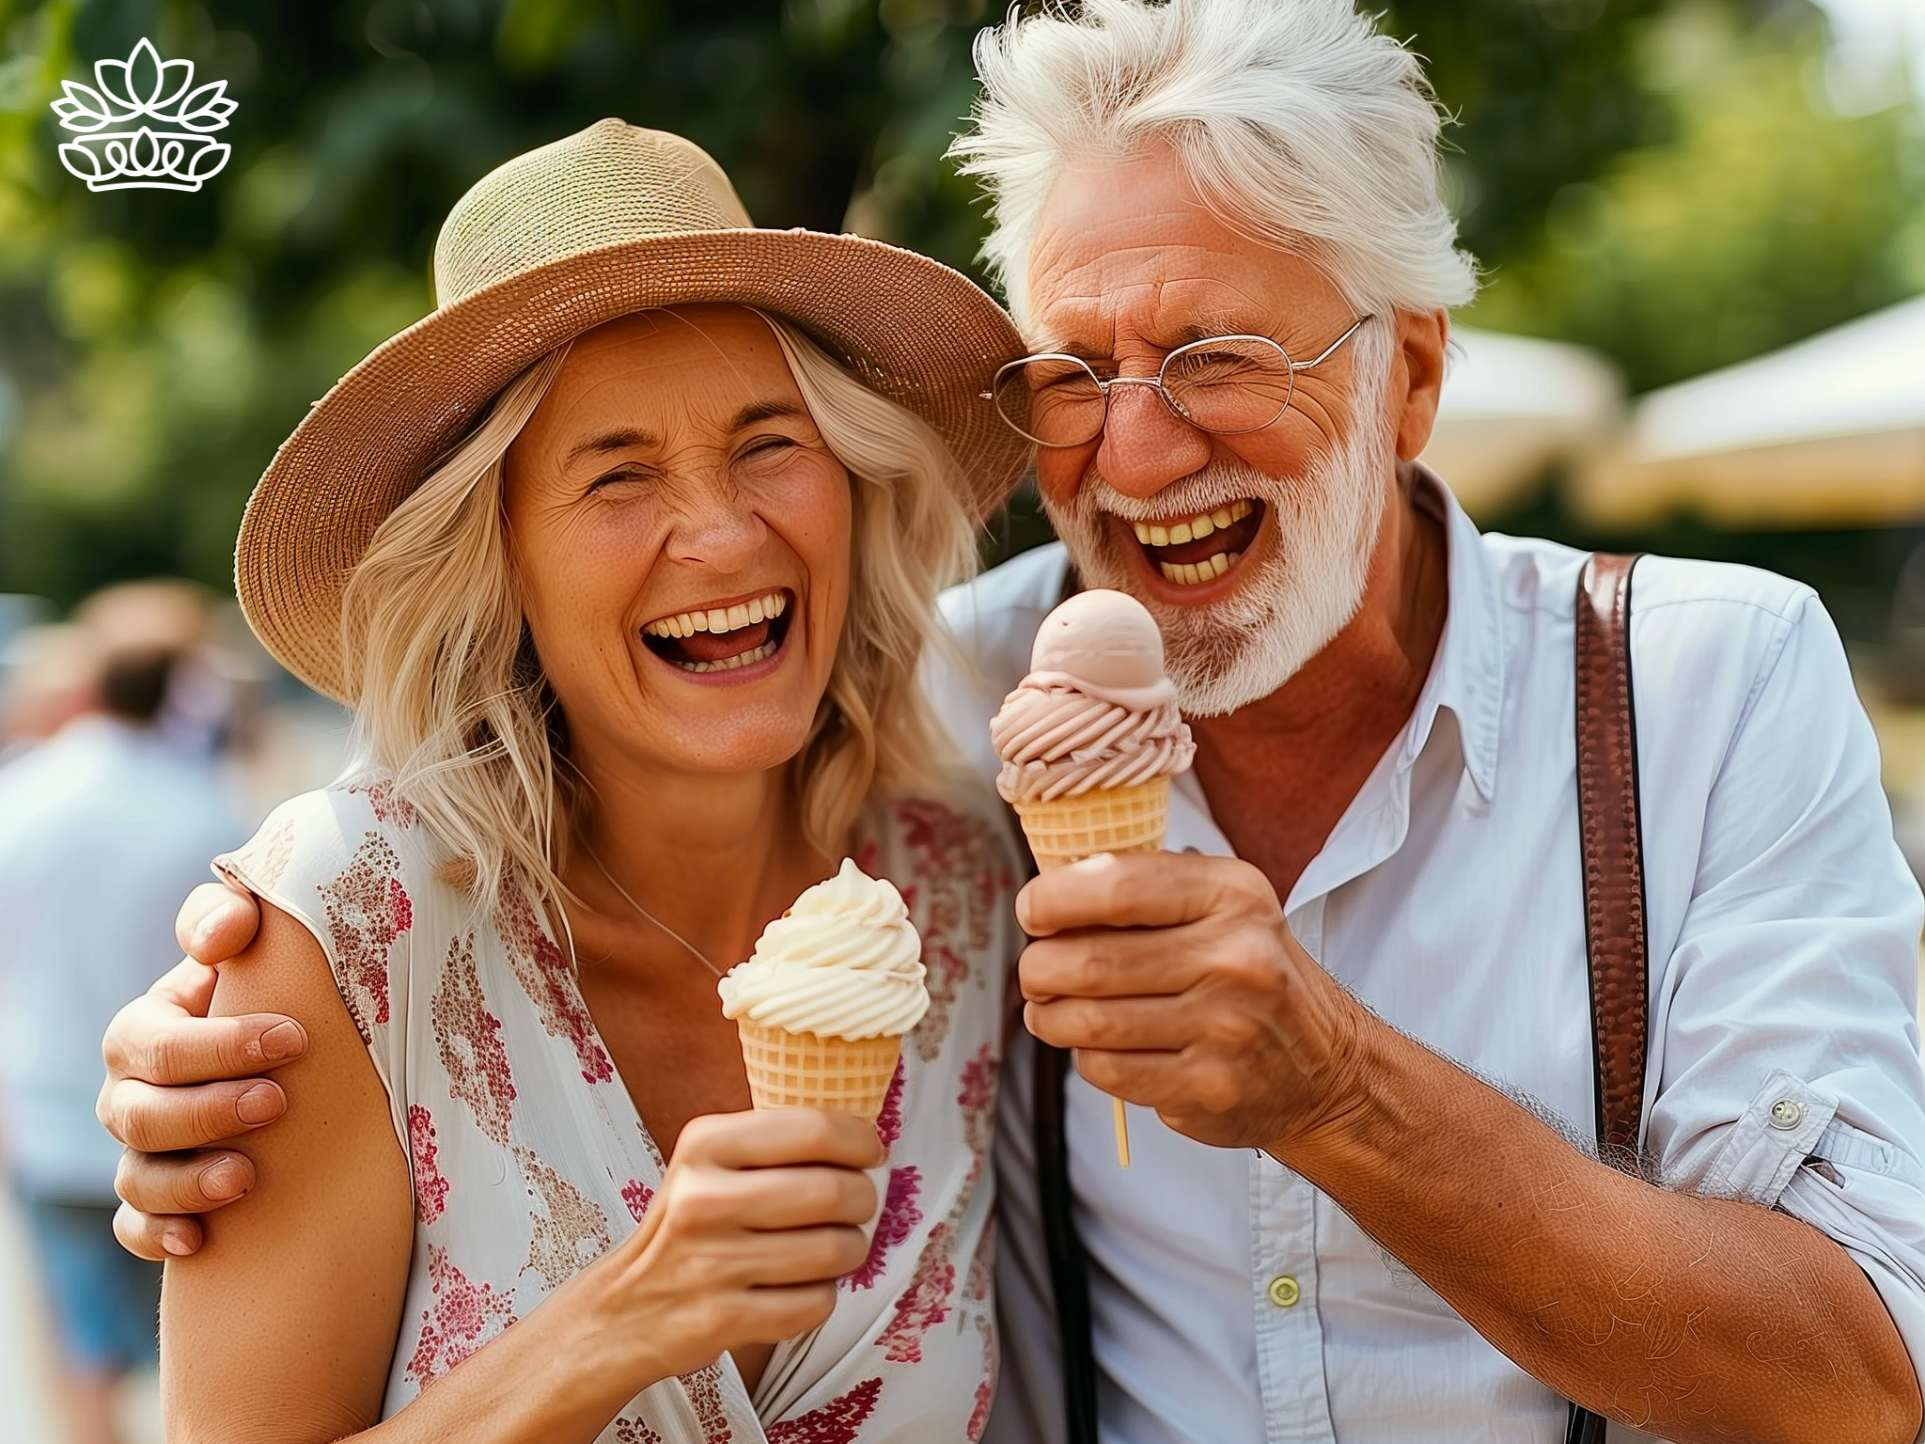 A radiant elderly couple laughing heartily, enjoying creamy ice creams on a sunny day, embodying the joy of life's simple pleasures with Fabulous Flowers and Gifts